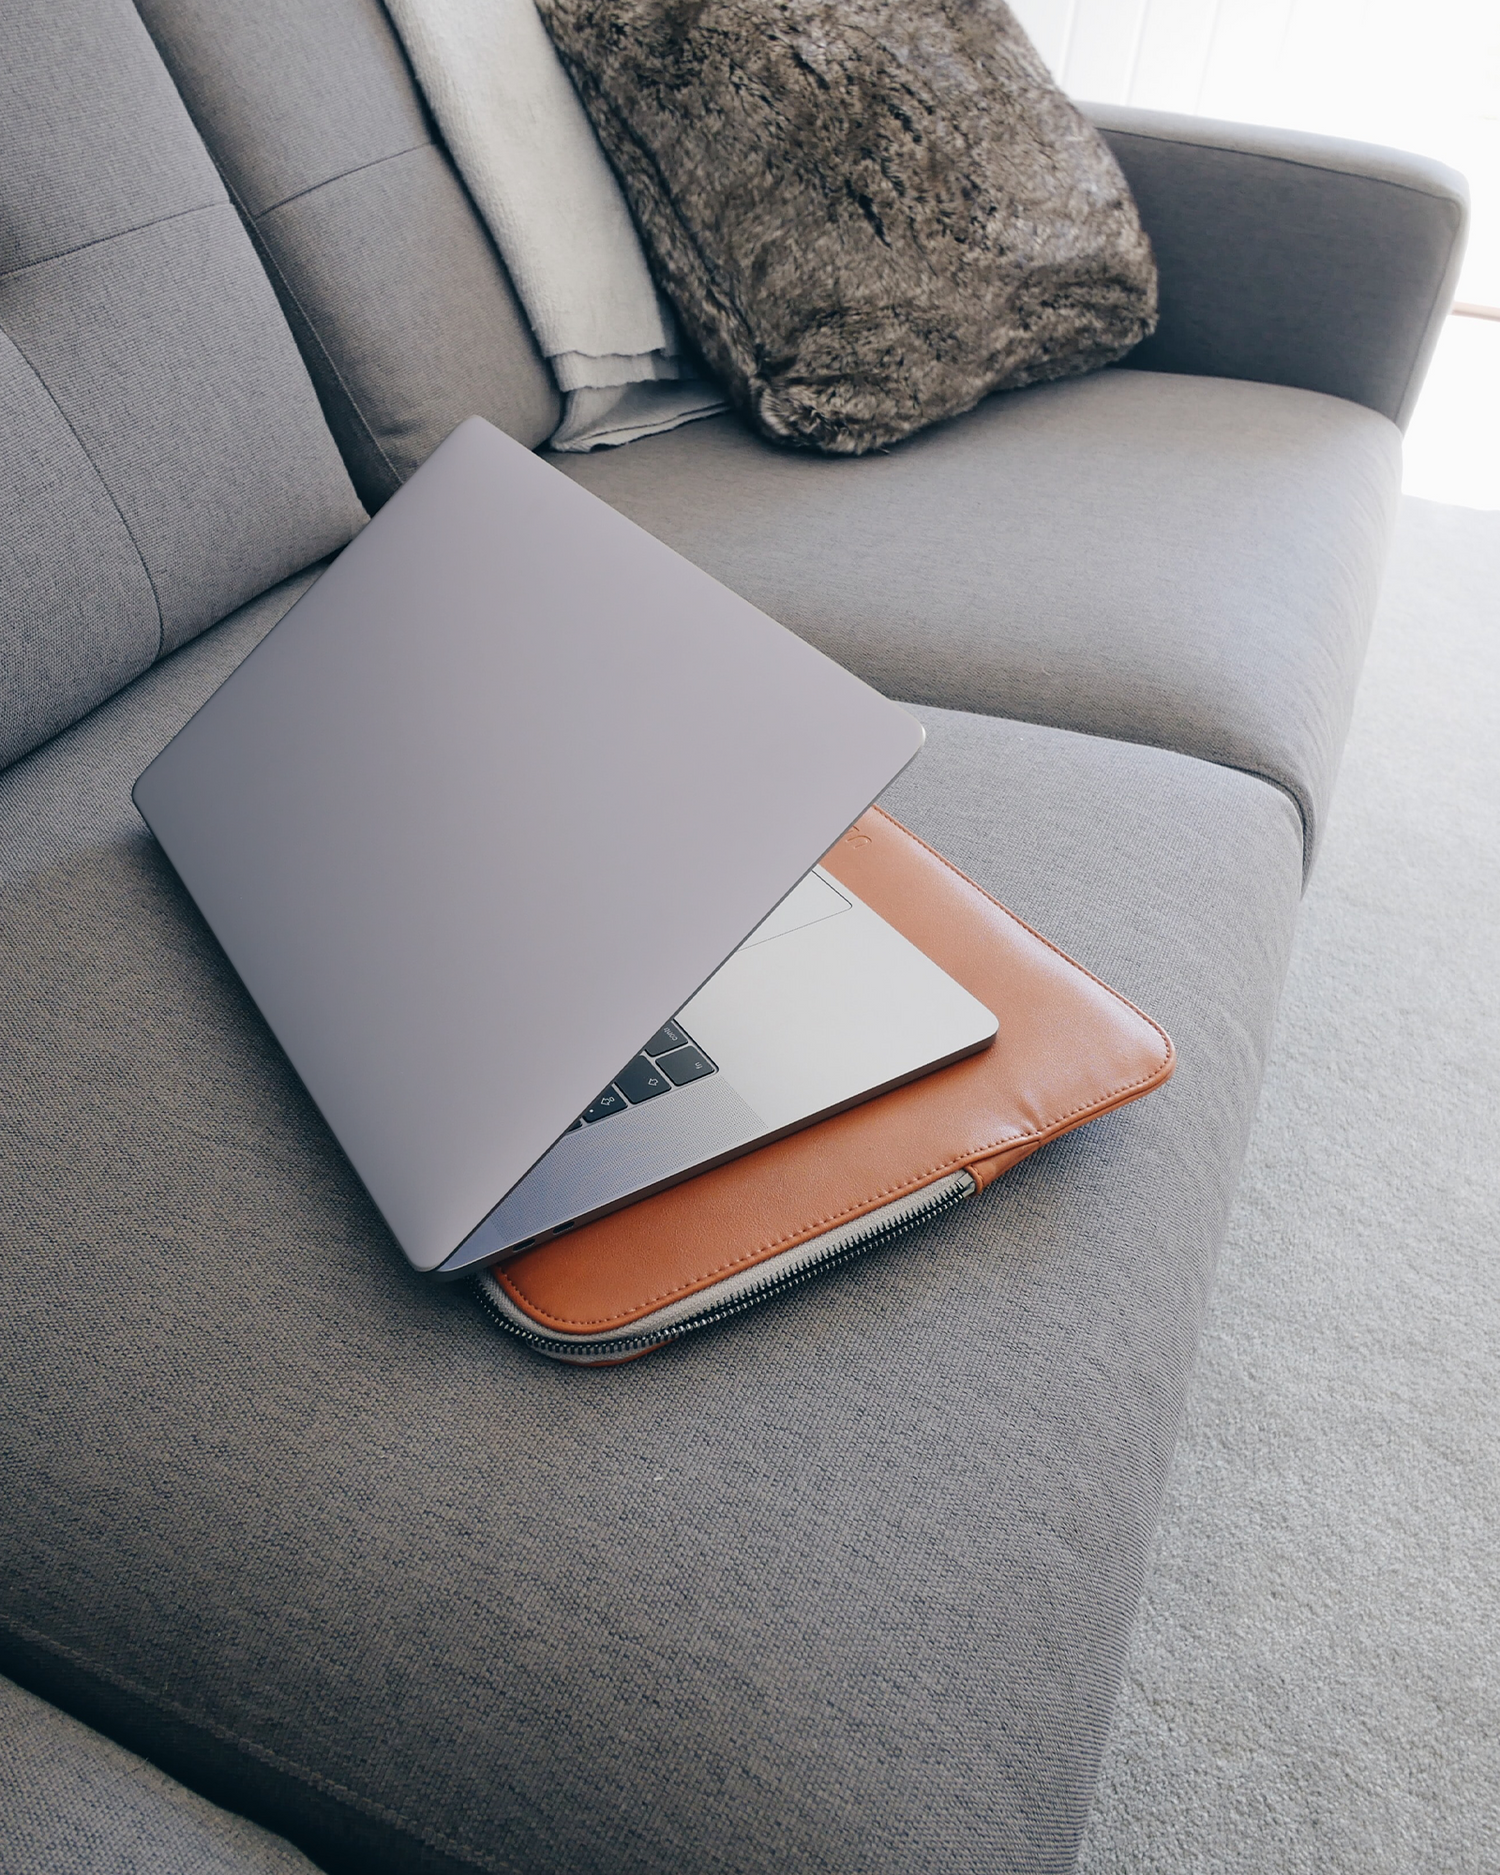 LIGHT PURPLE Laptop Skin for 15 inch Apple MacBooks on a couch